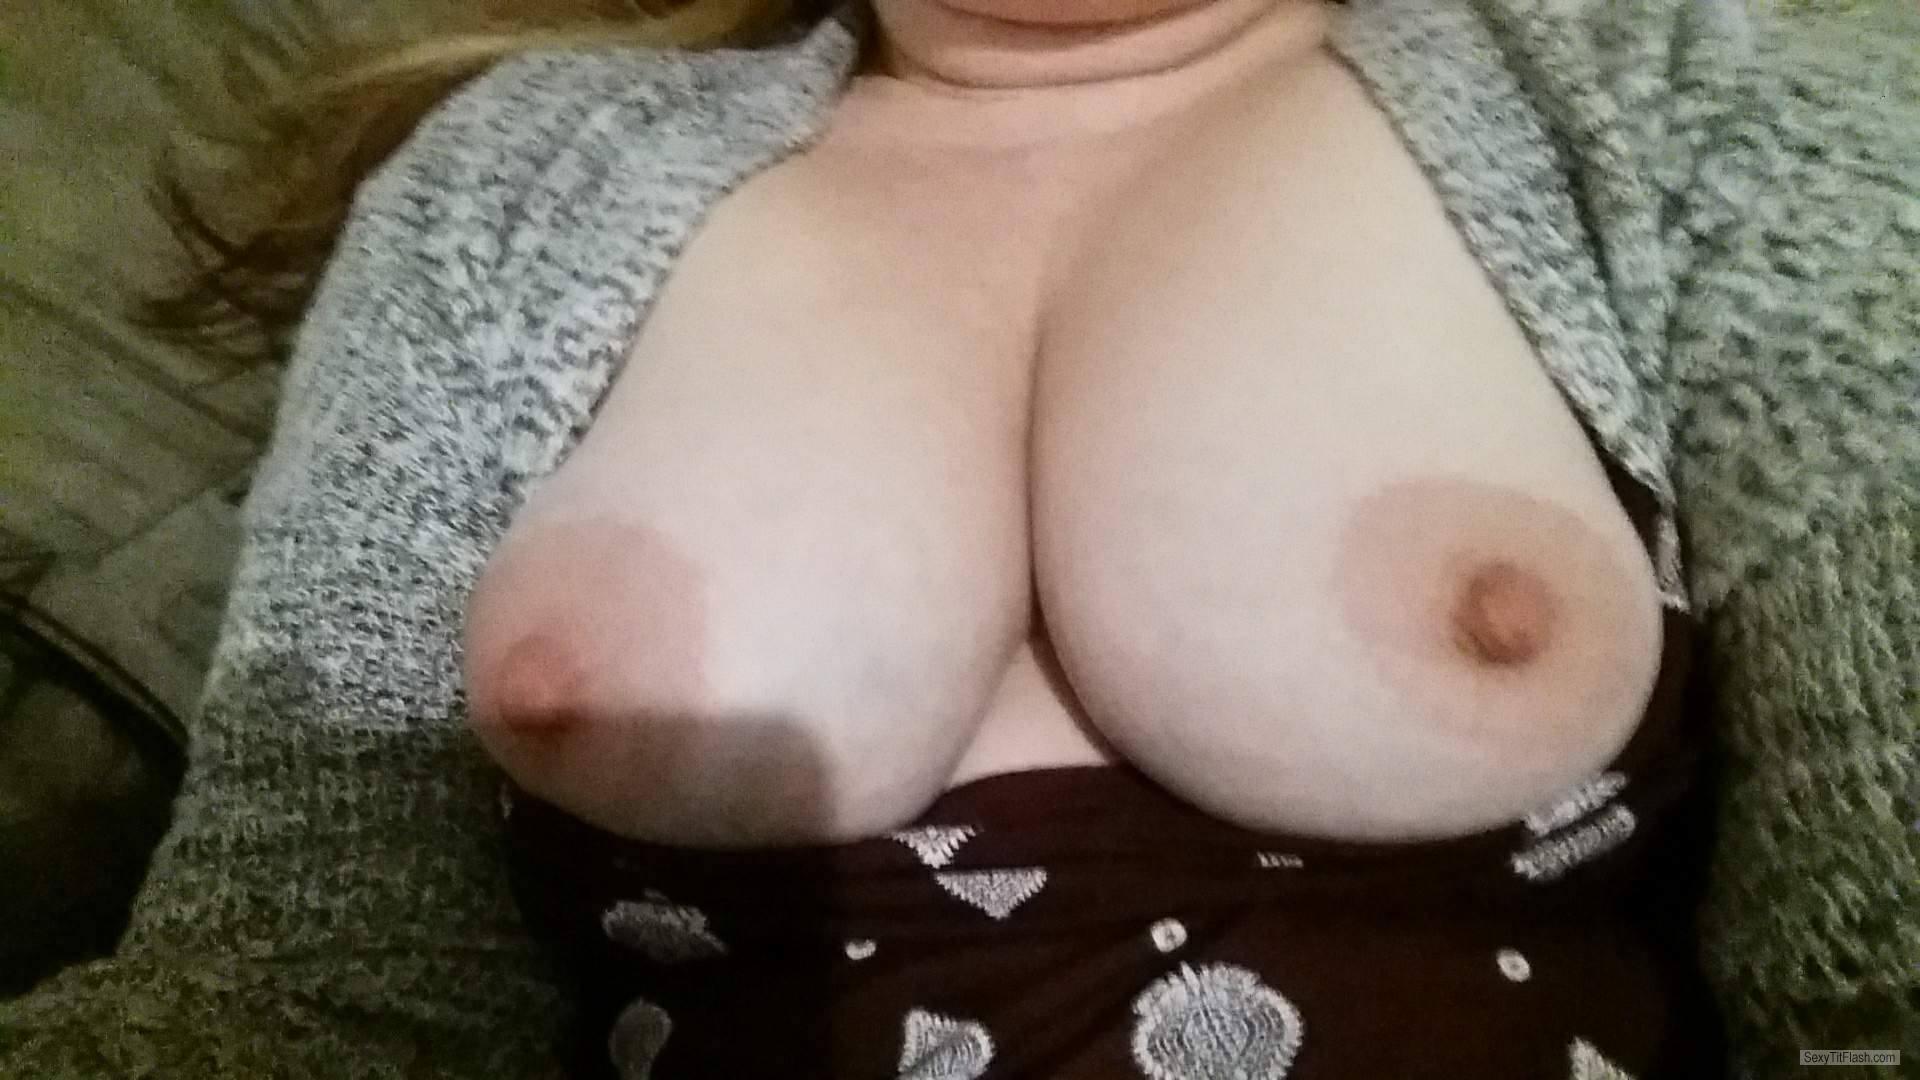 Tit Flash: My Big Tits - Topless Mysexywife from New Zealand